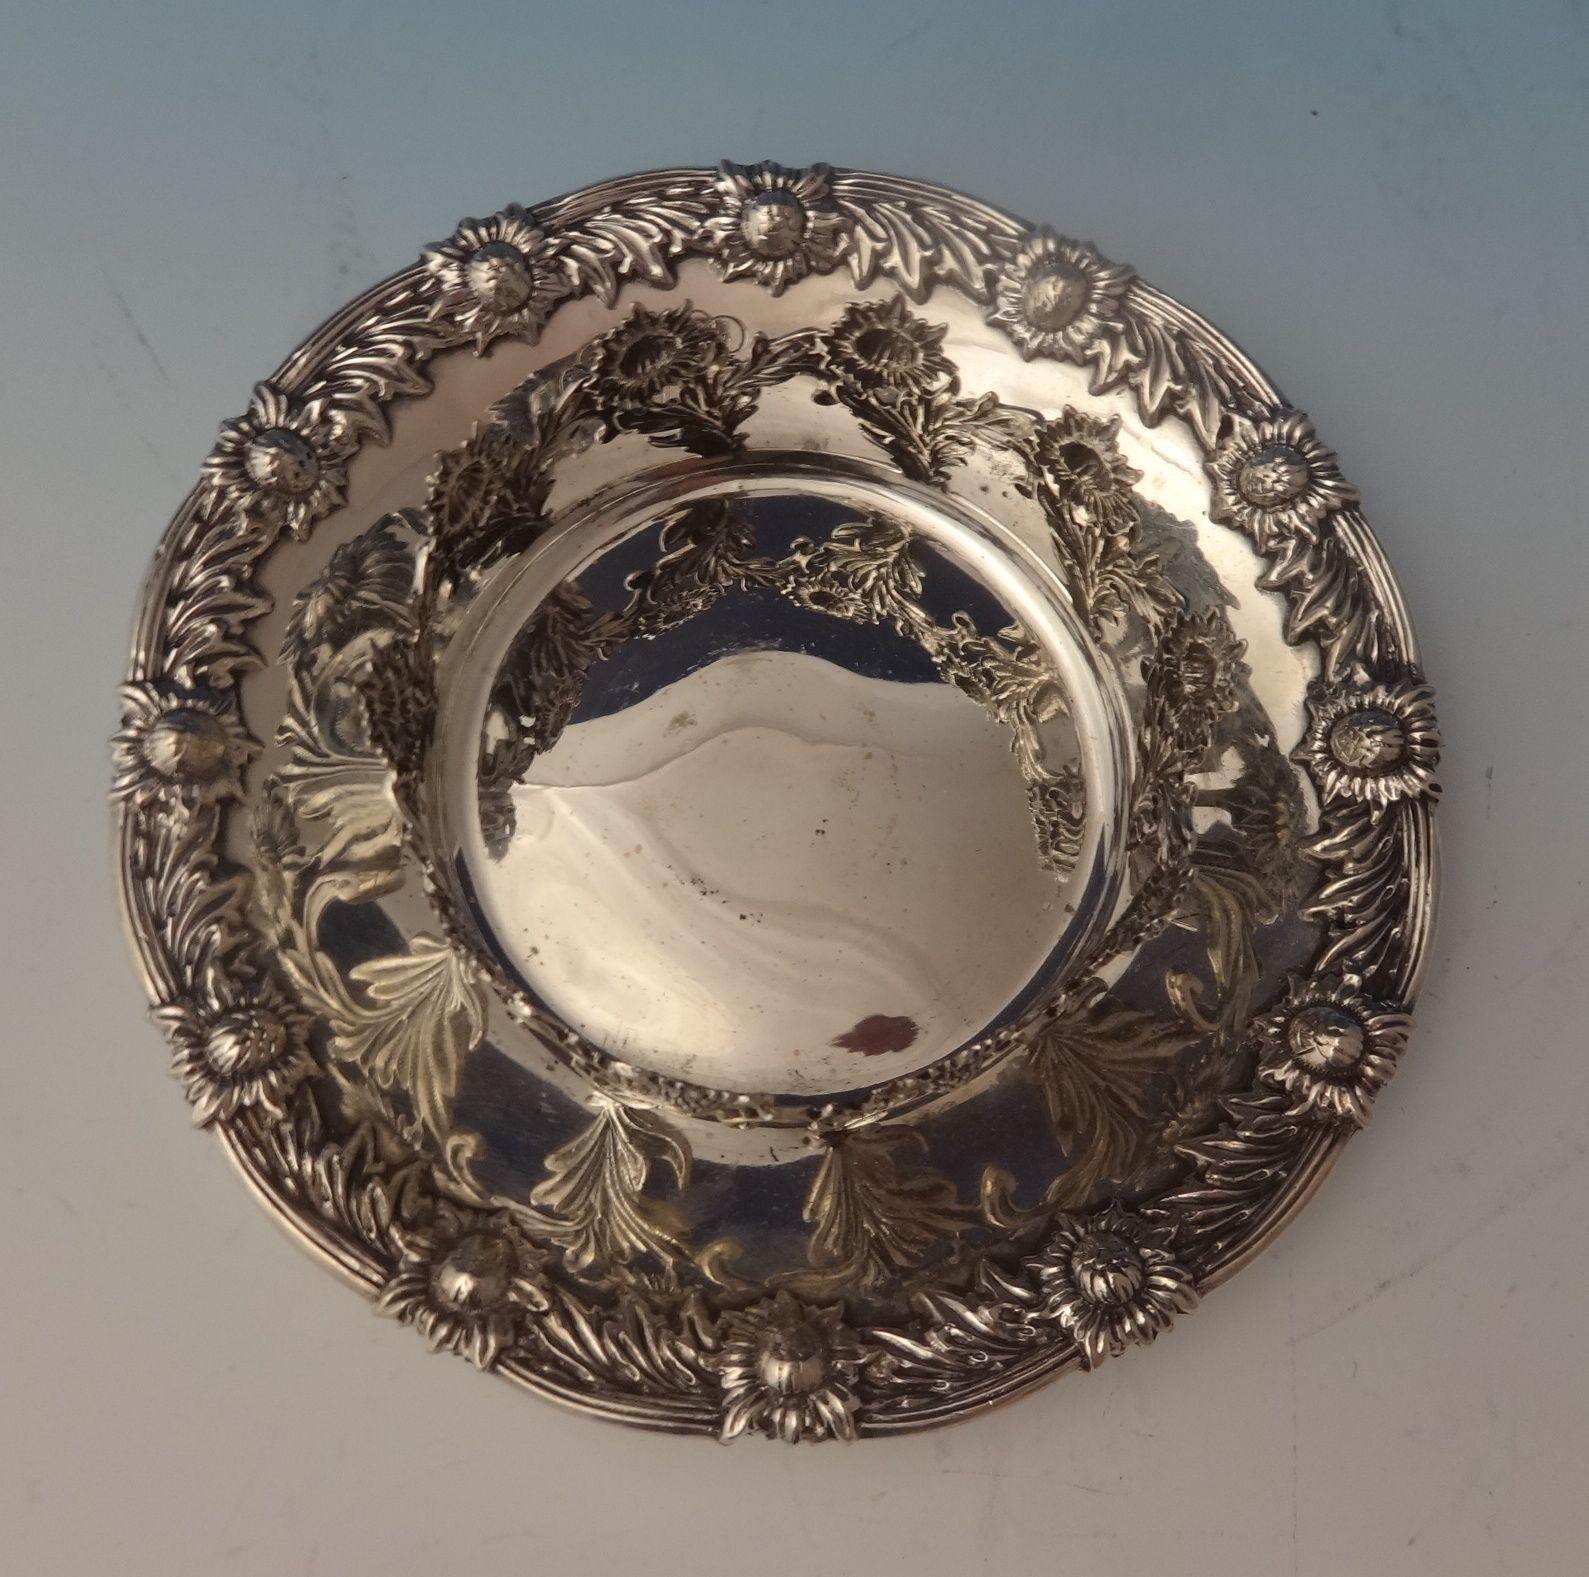 Superb Chrysanthemum by Tiffany & Co. sterling glass holder with attached coaster and glass insert. It is marked #15368/8068 and it's stamped with the letter C date letter for 1902-7. The measurements for the piece are 1 1/4 tall, with the glass